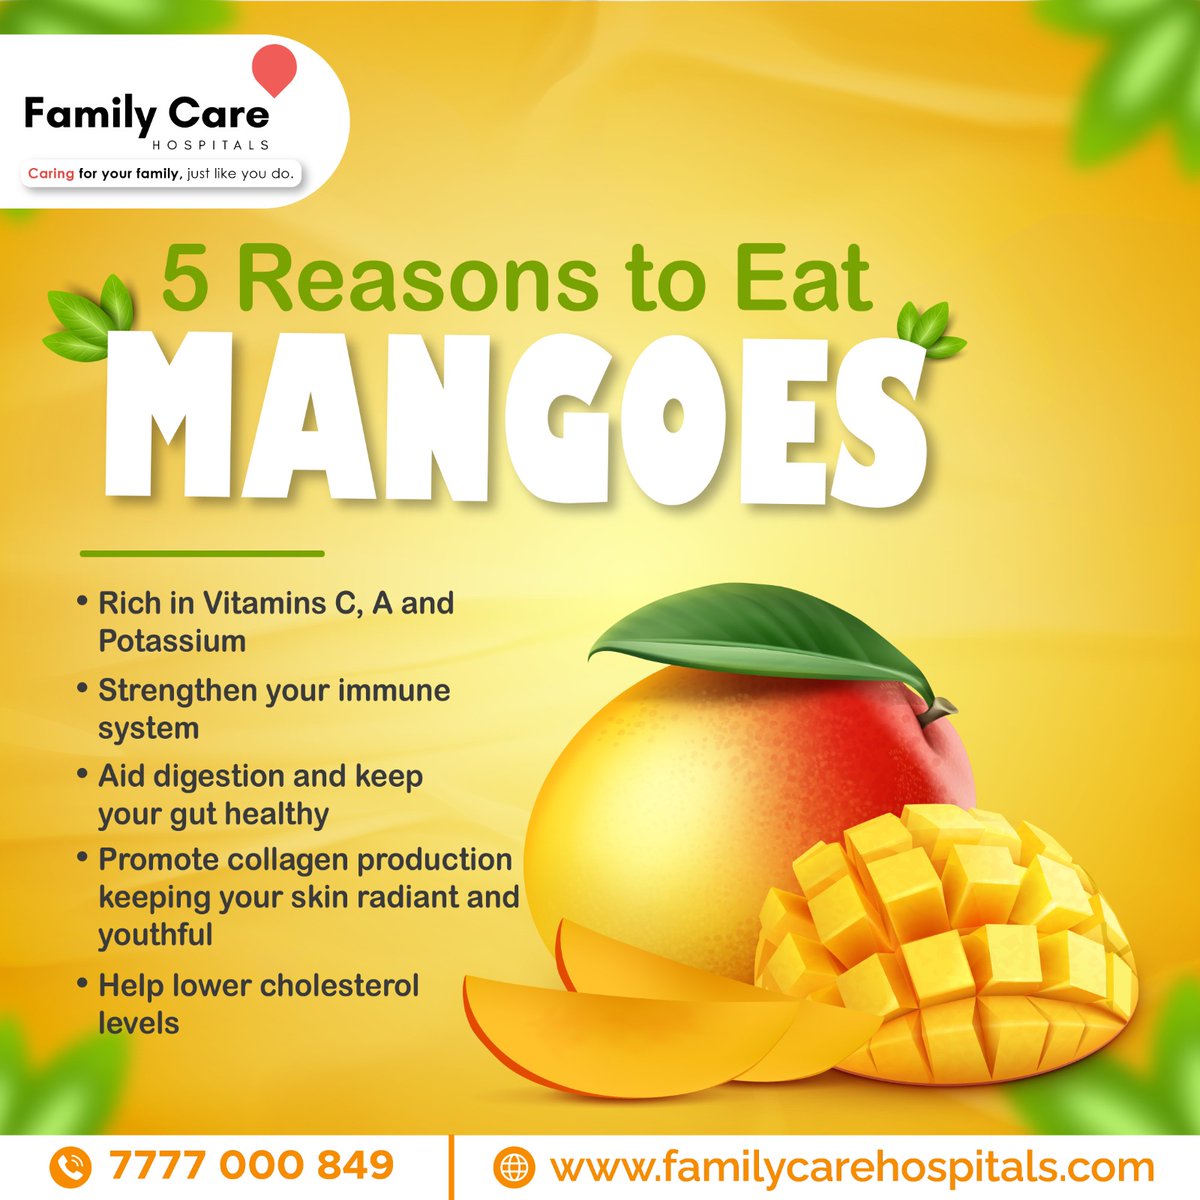 Did you know? The body is naturally alkalized by mangoes. This fruit of summer contributes to the body's ability to maintain a healthy alkaline level by containing tartaric, malic, and minor amounts of citric acid. 

#FamilyCareHospitals #benefitsofmango #seasonalfruit